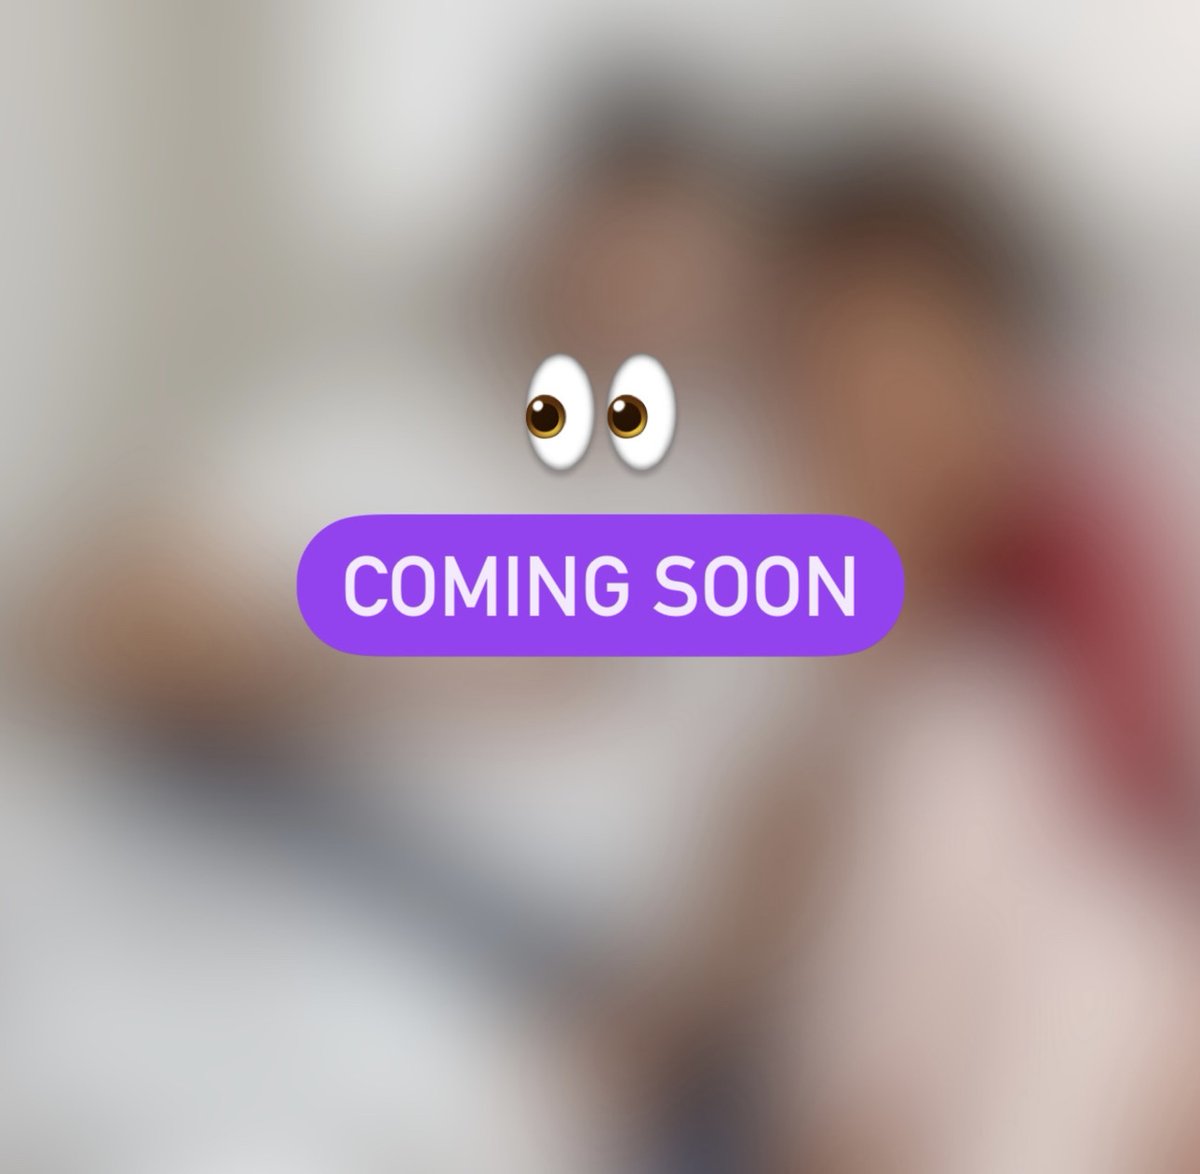 📣 NEW feature coming soon 👀 any guesses on what it is? #Premom